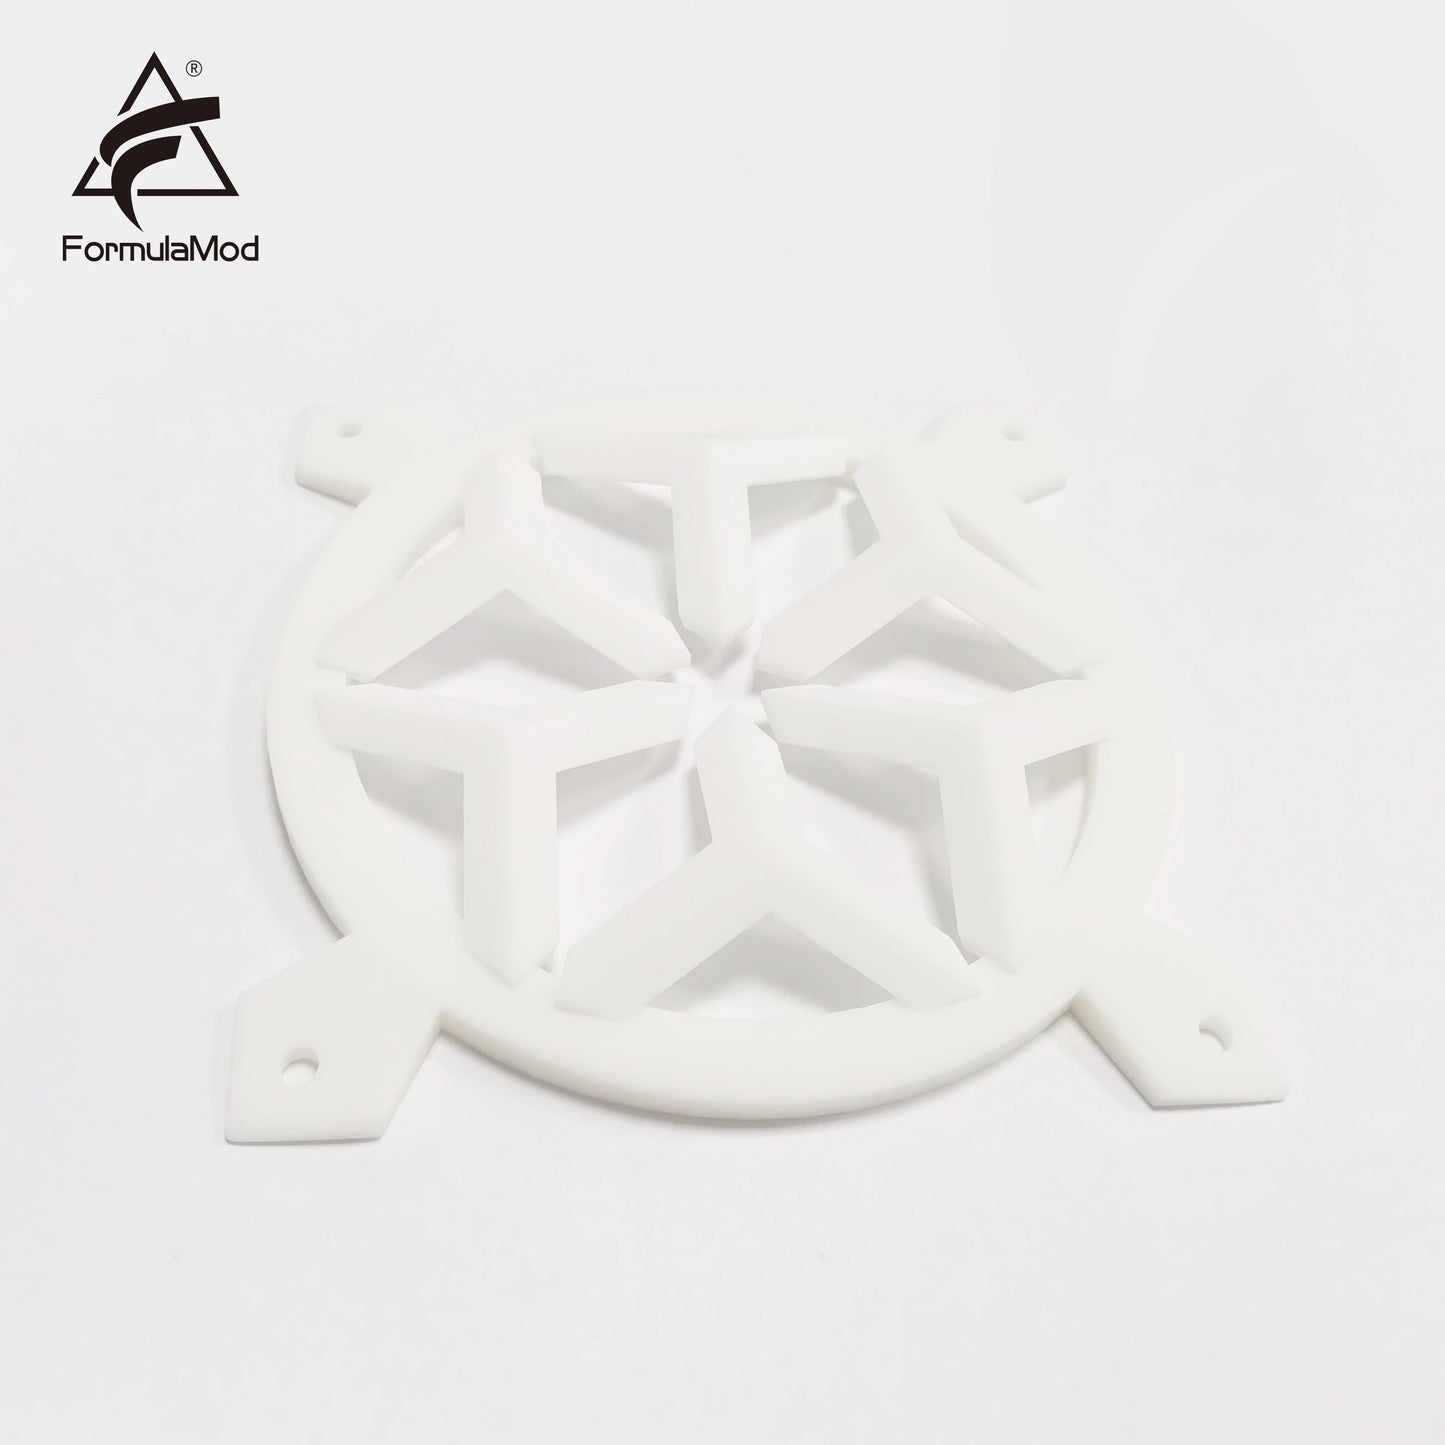 FormulaMod 3D Printed Semi-finished Fan Cover, Spray Paint By Yourself, Resin Material, Durable, Suitable For 12cm Fans, One Set 3 Pcs